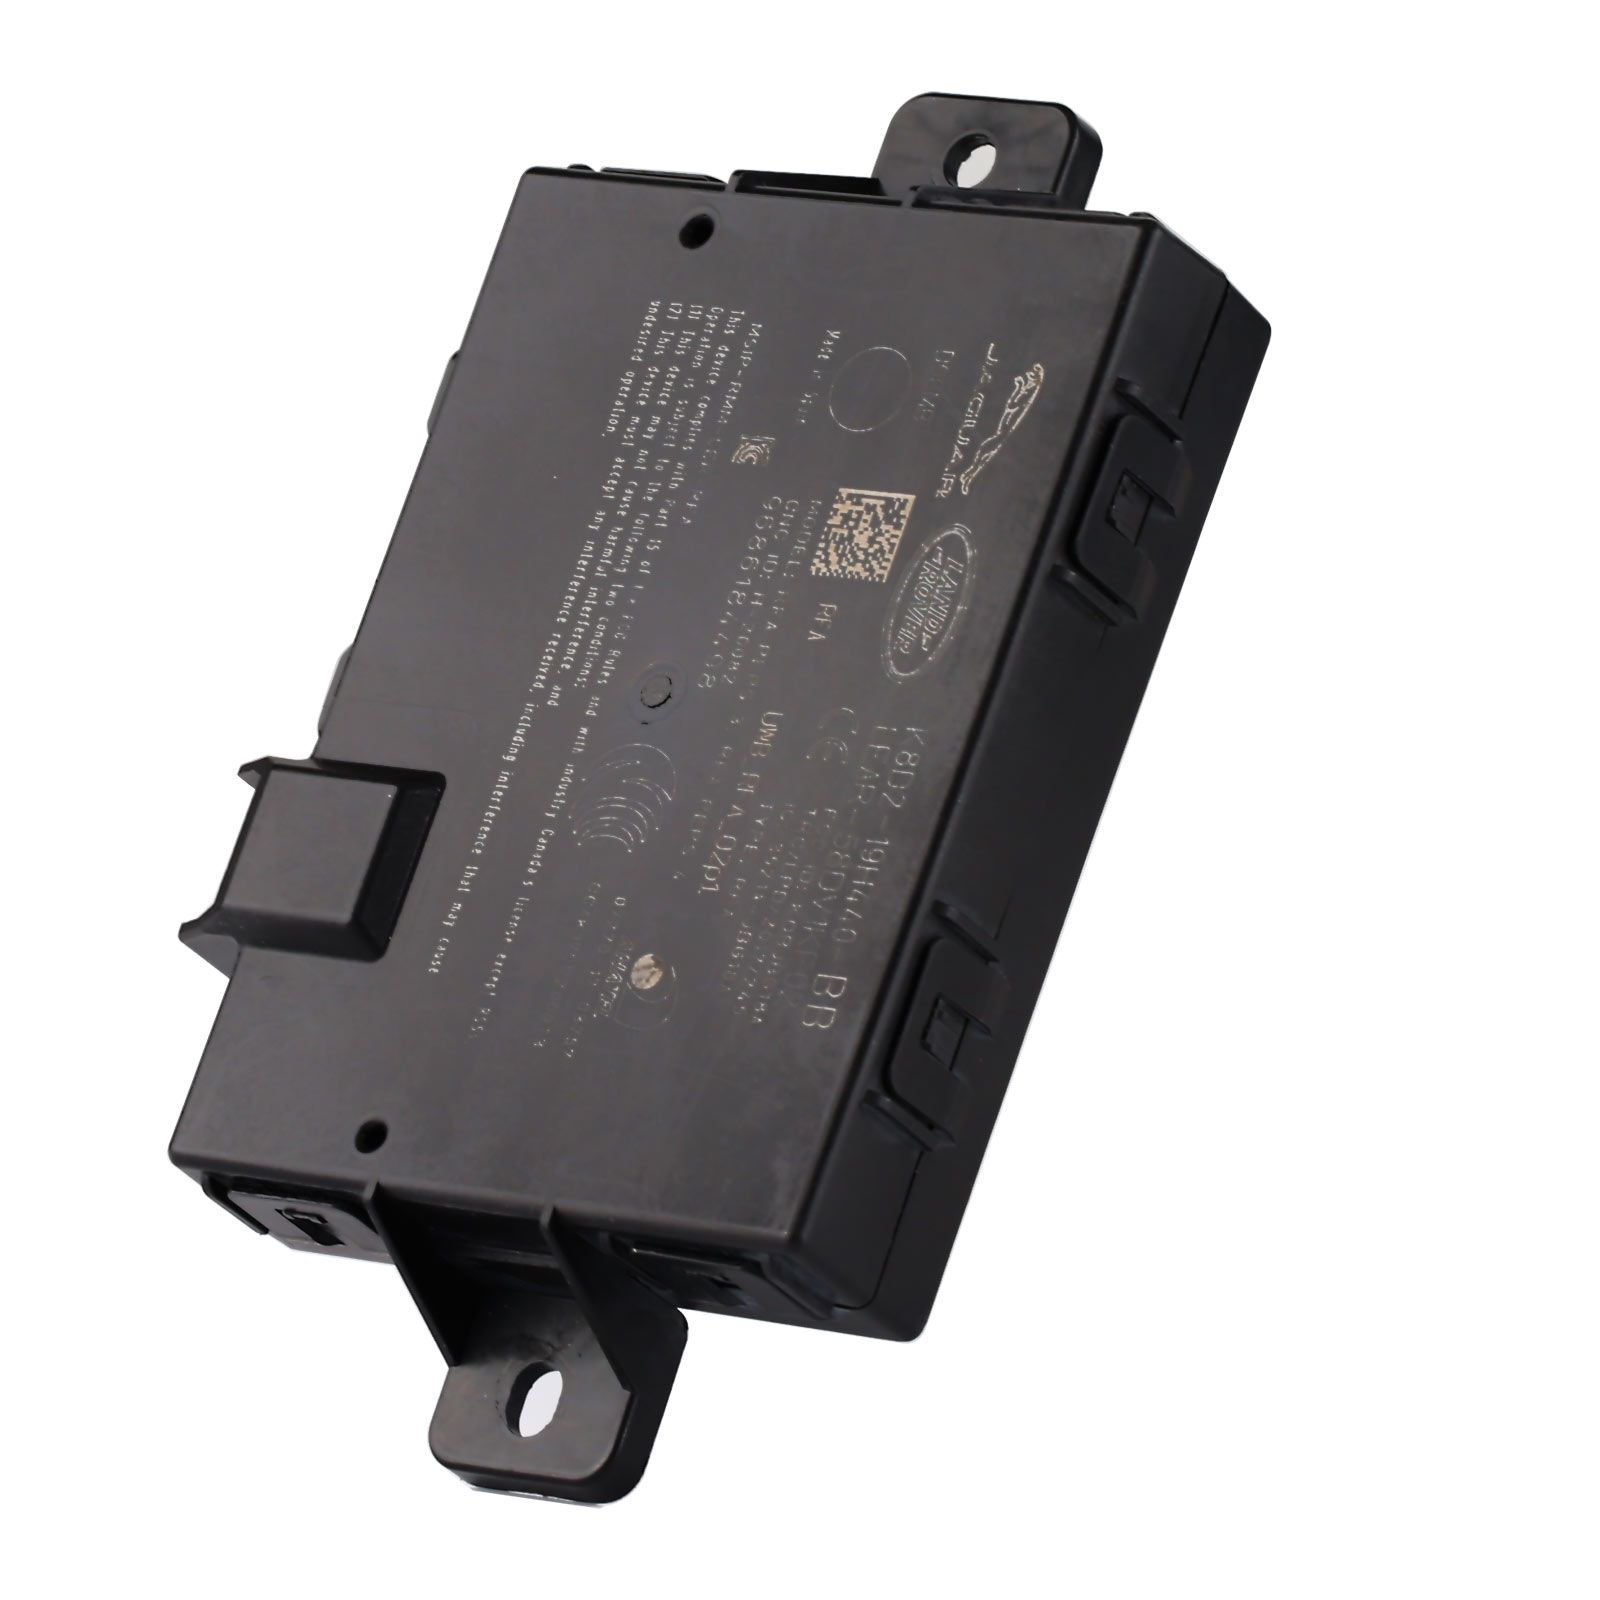 OEM Jaguar Land Rover RFA Module K8D2 with Comfort Access contains SPC560B Chip and Data